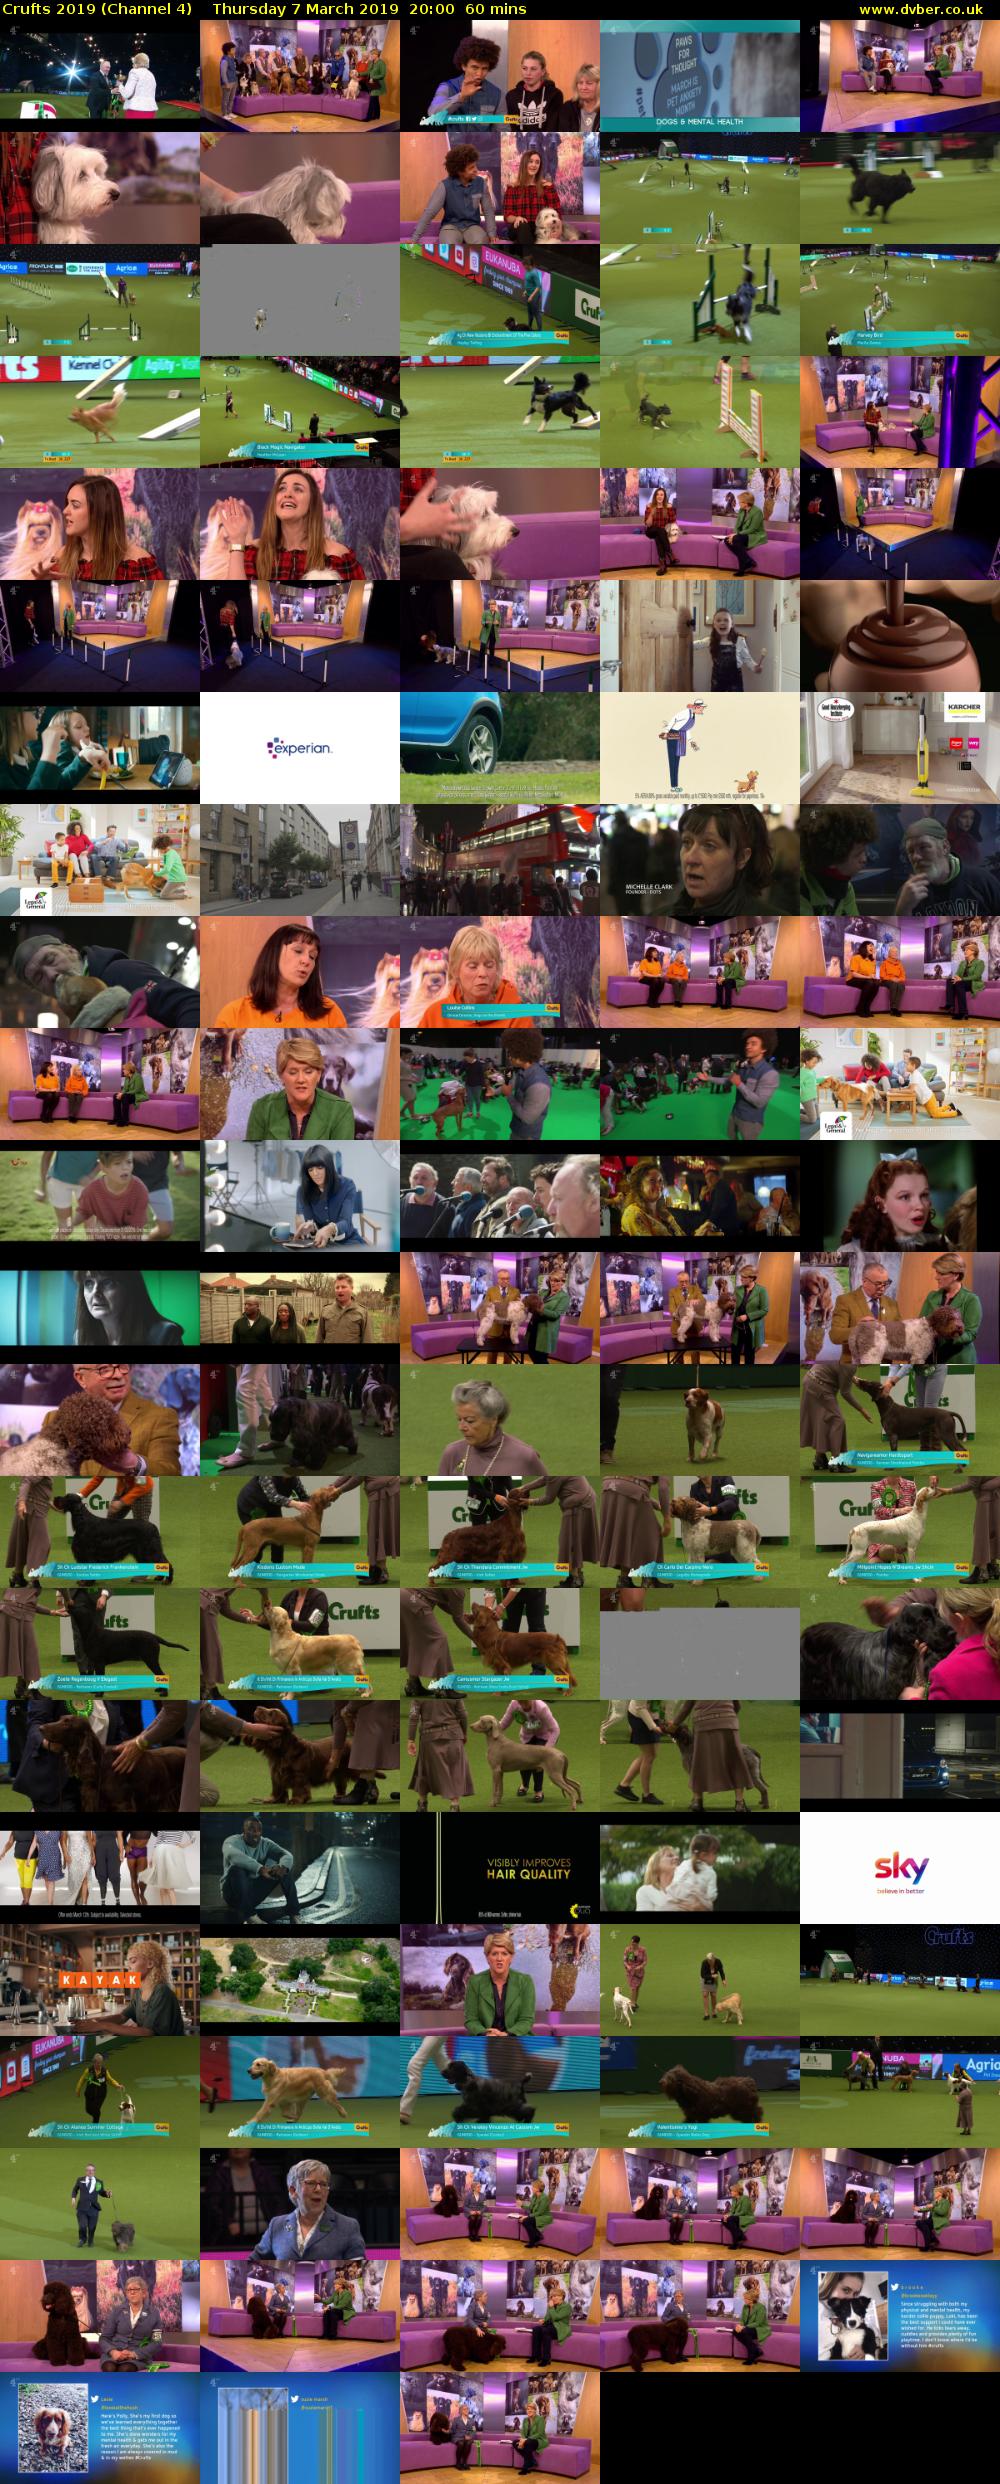 Crufts 2019 (Channel 4) Thursday 7 March 2019 20:00 - 21:00